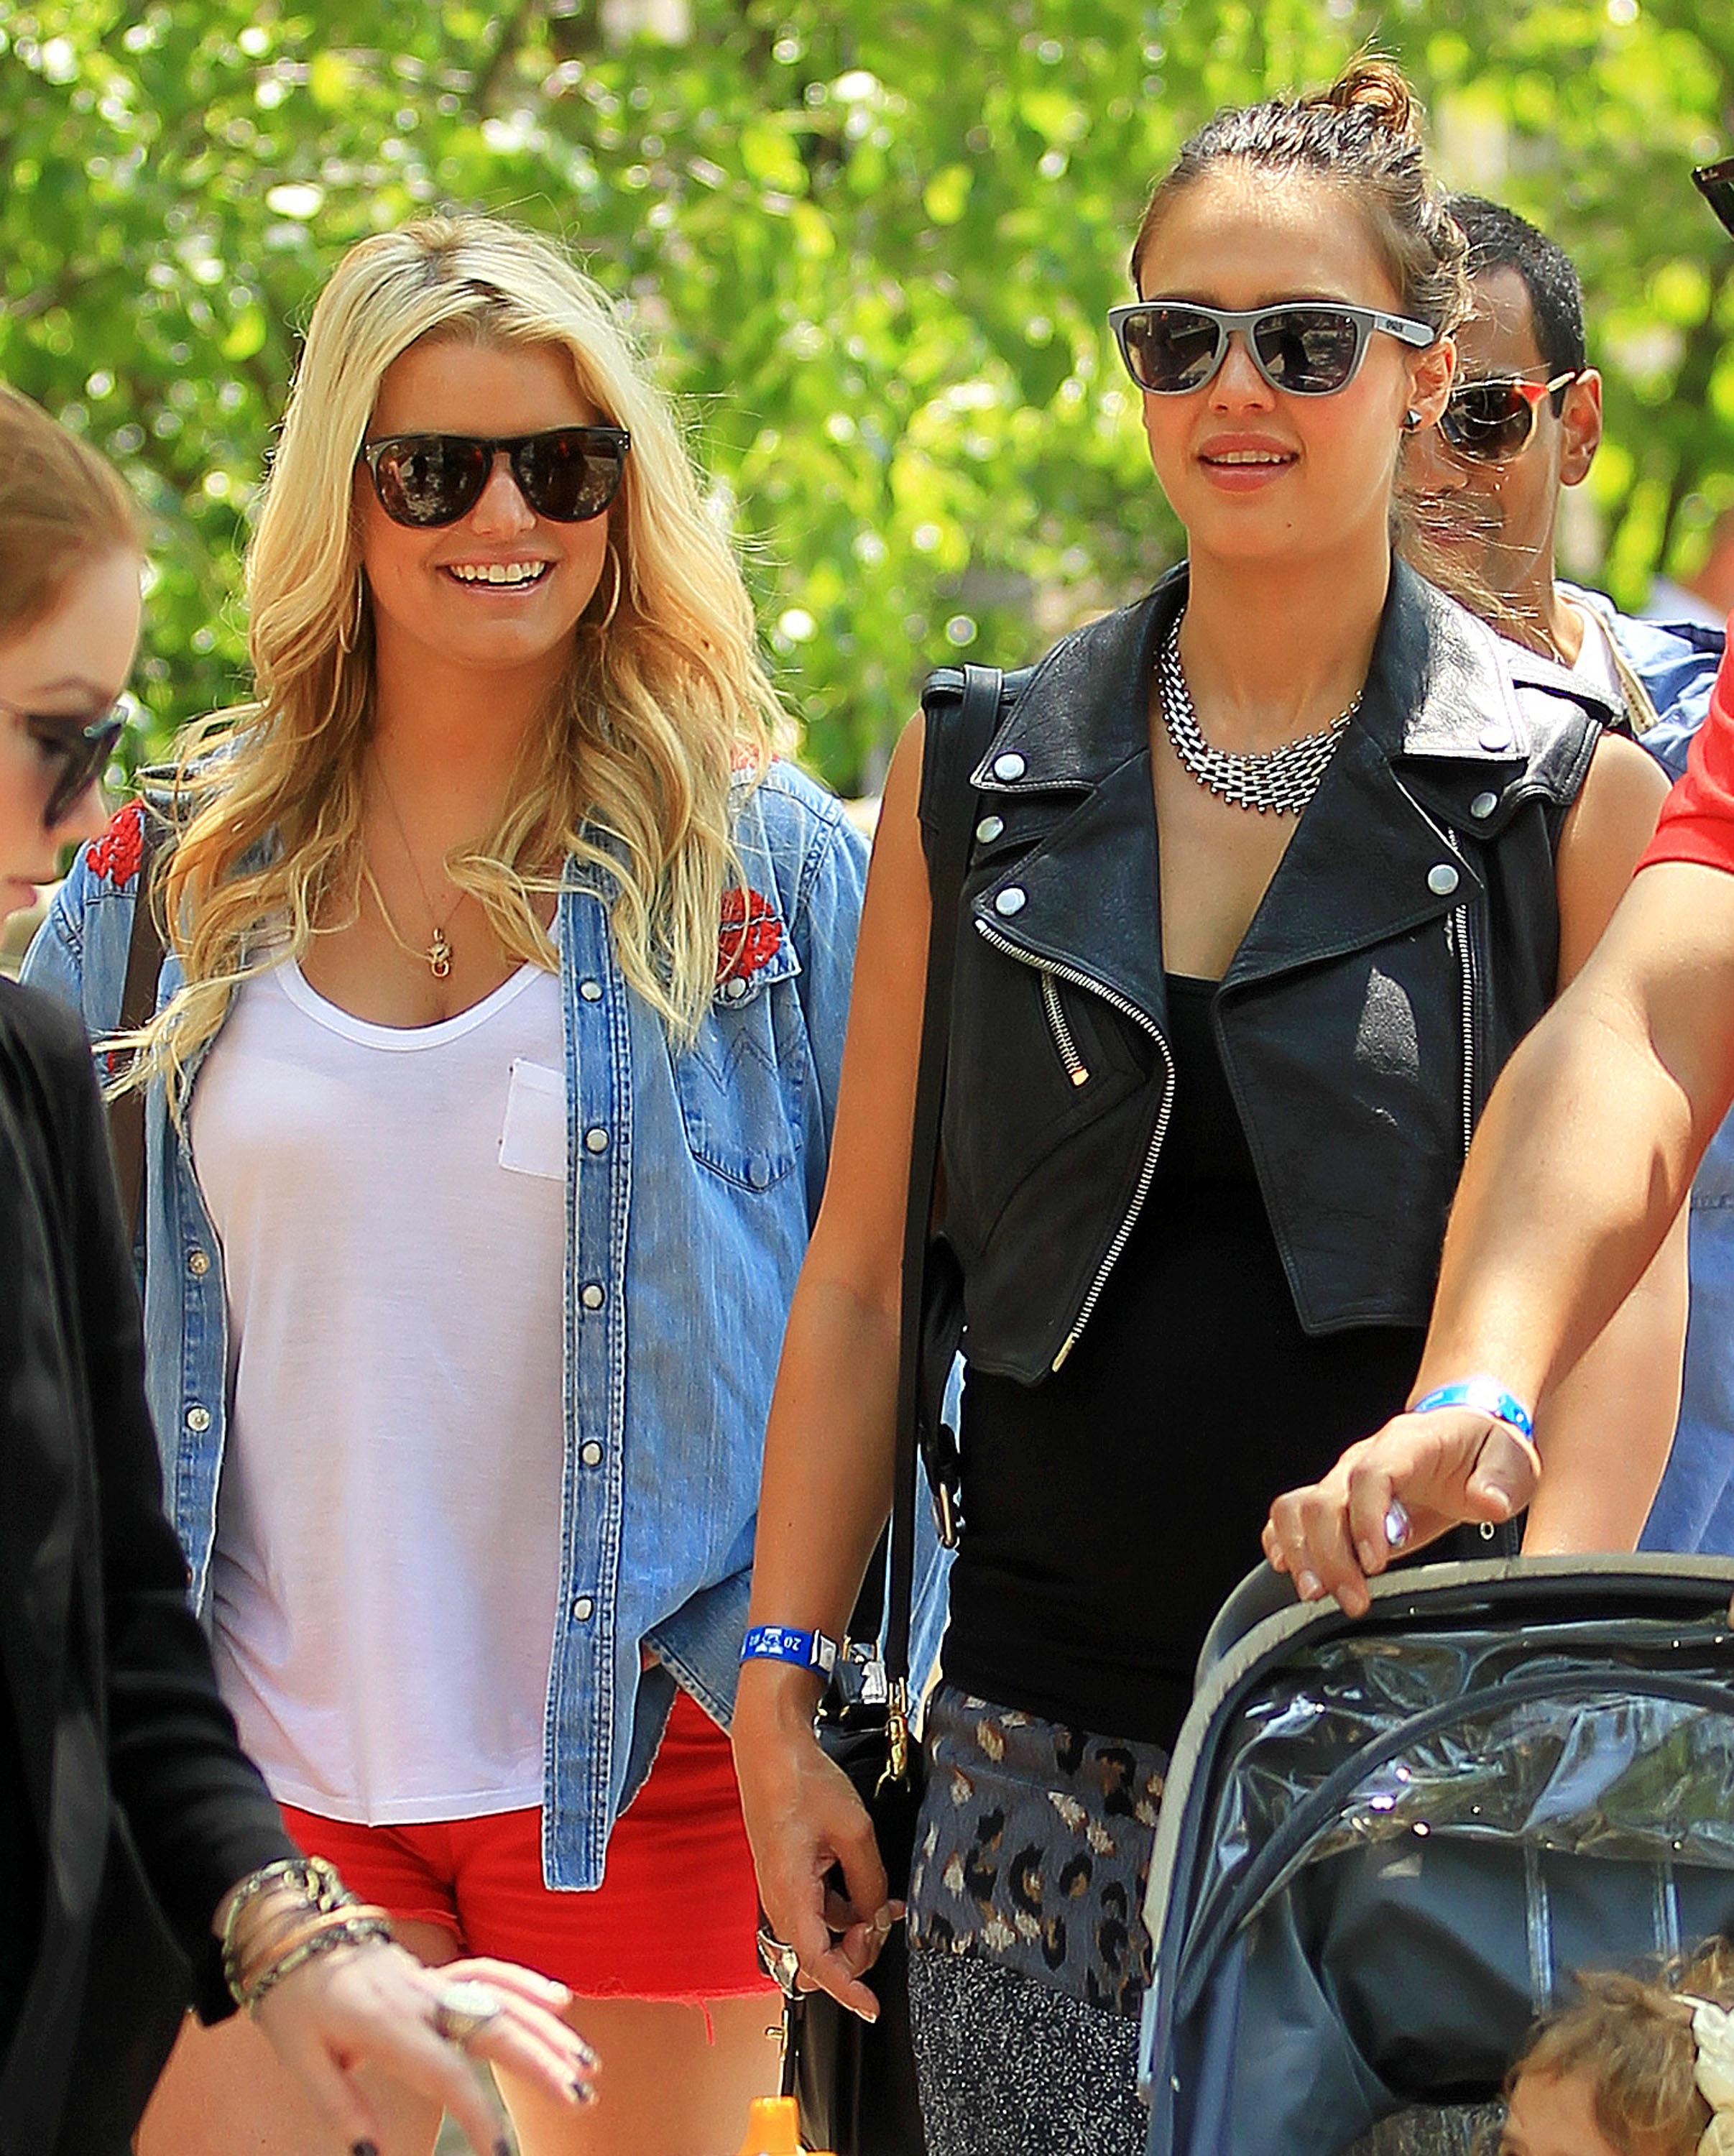 Jessica Alba and Jessica Simpson shot together at Yale University in New Haven, CT